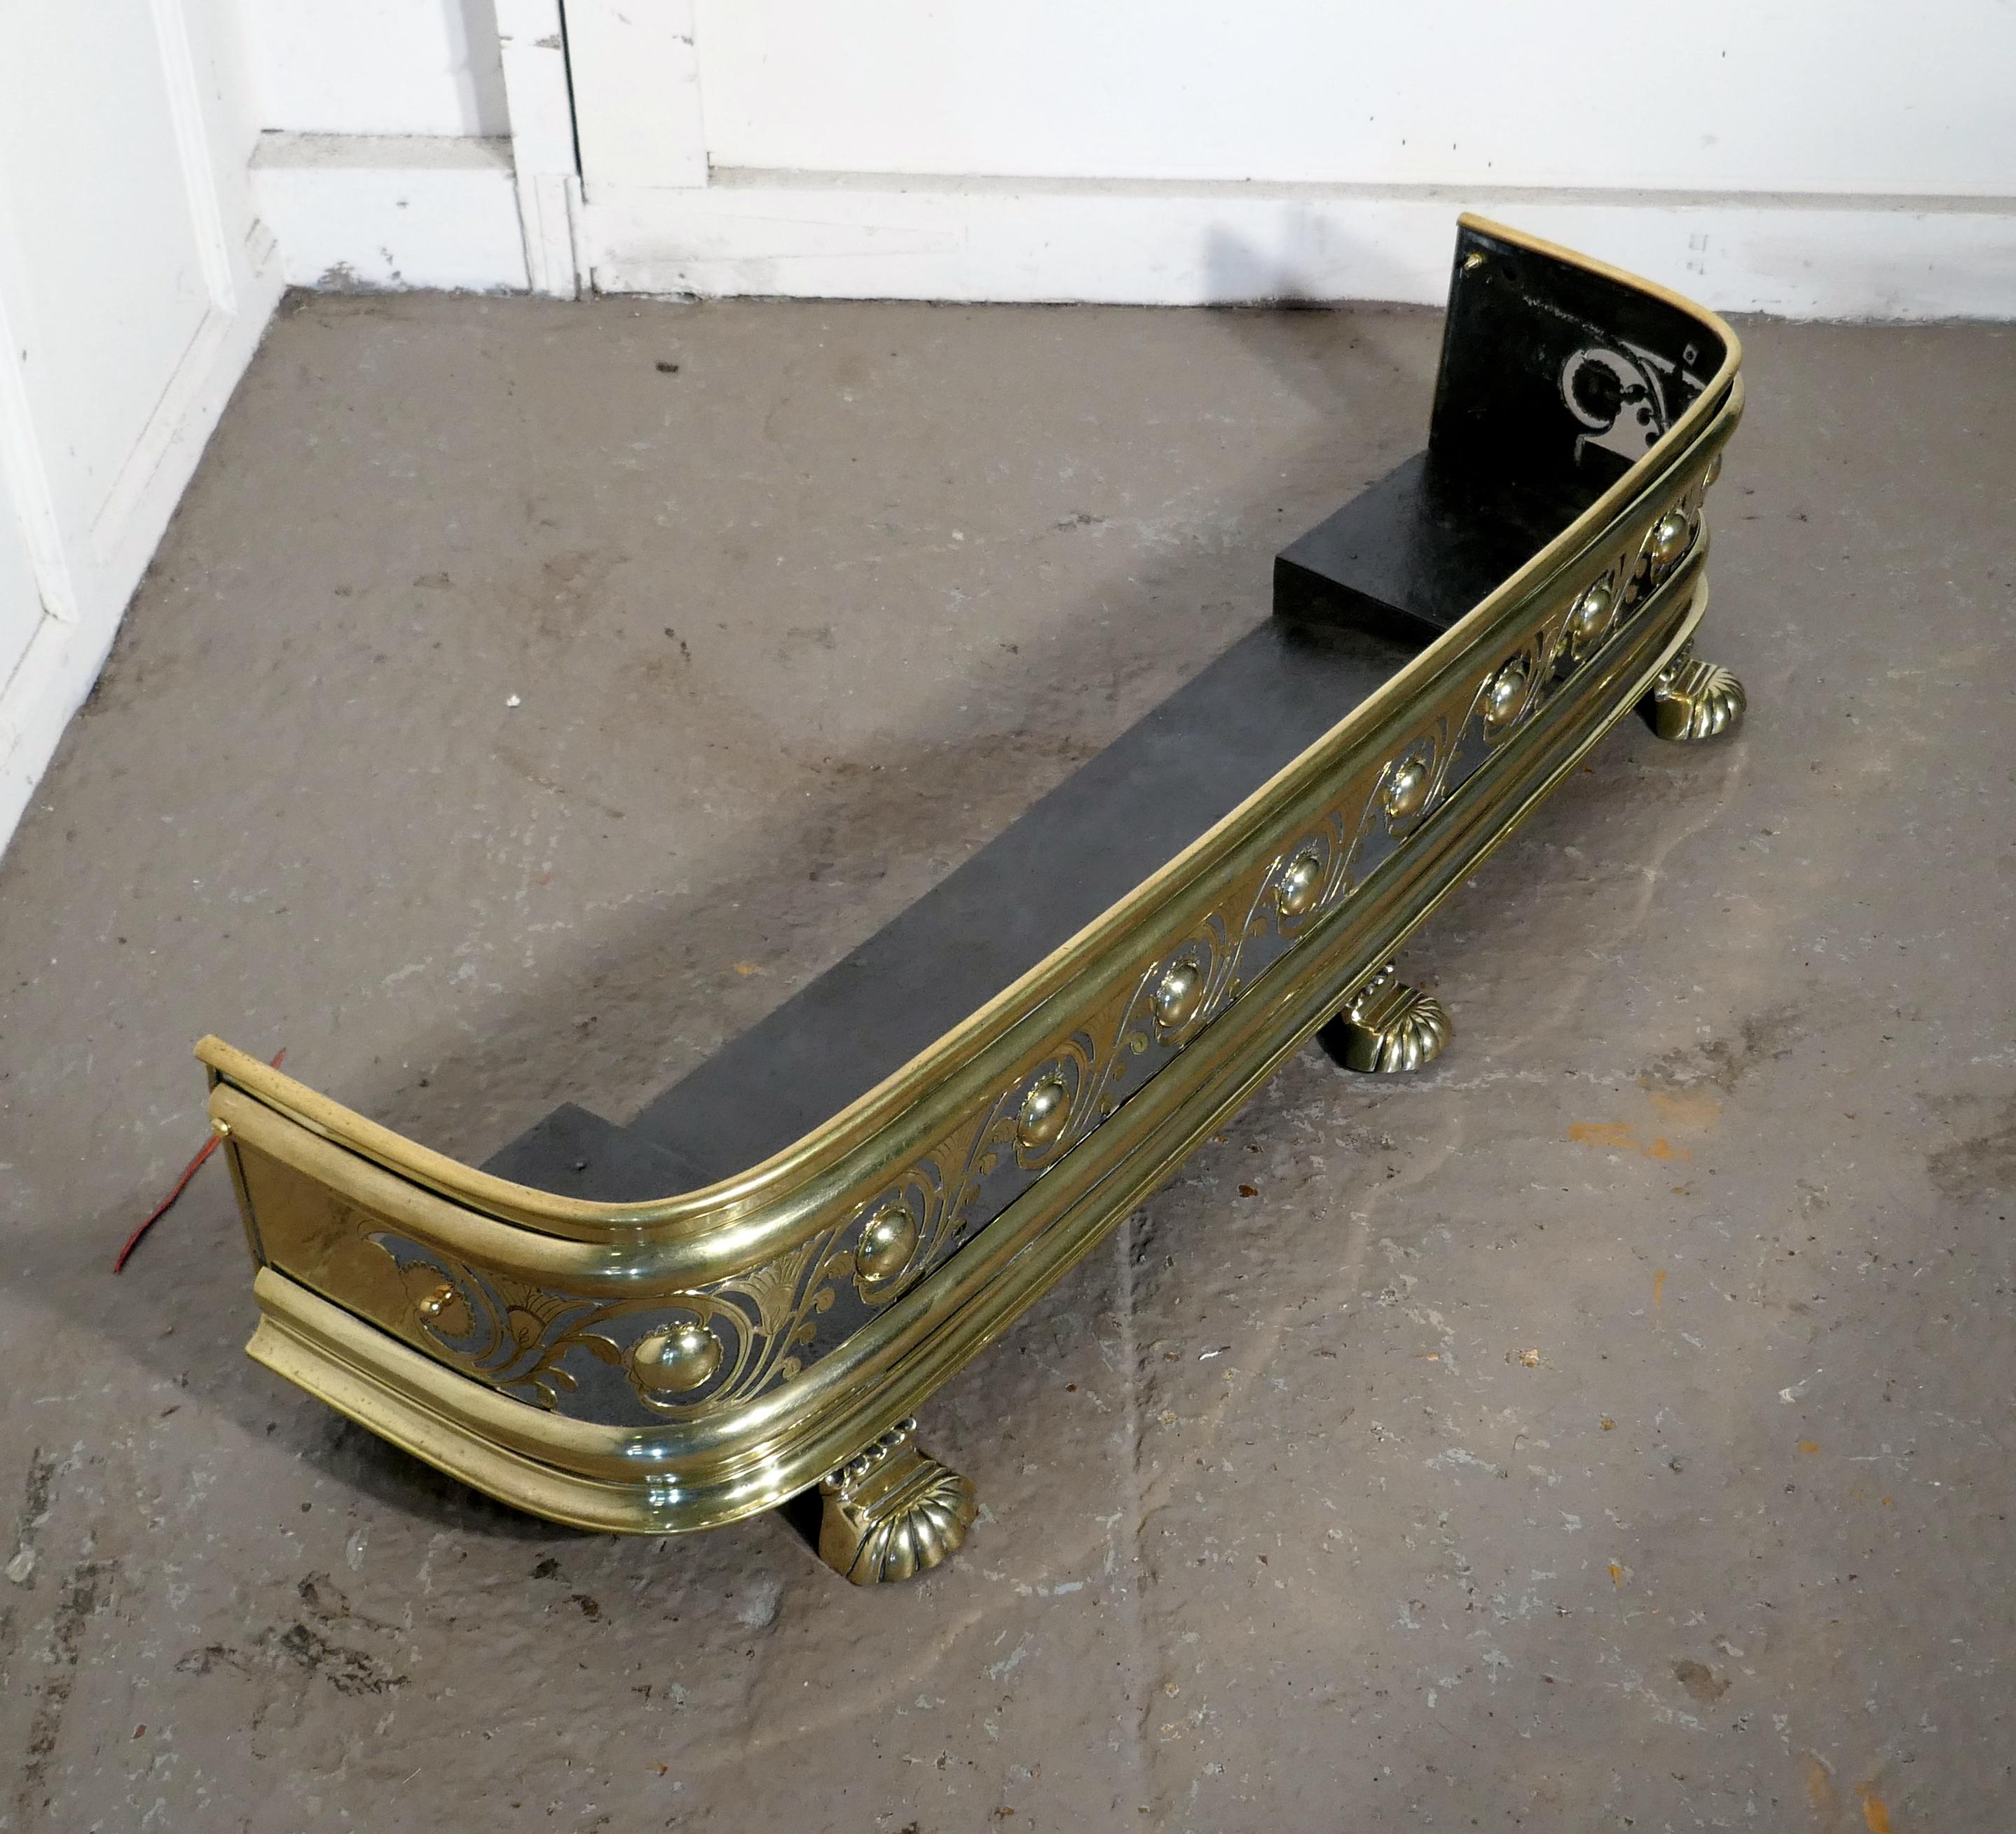 Arts & Crafts pierced brass fender

This is a Victorian pierced brass fender decorated with leaves and flower it has an iron base and stands on stylised lions paw feet
The fender is in very good condition it is 9” high, 44” long and 12”